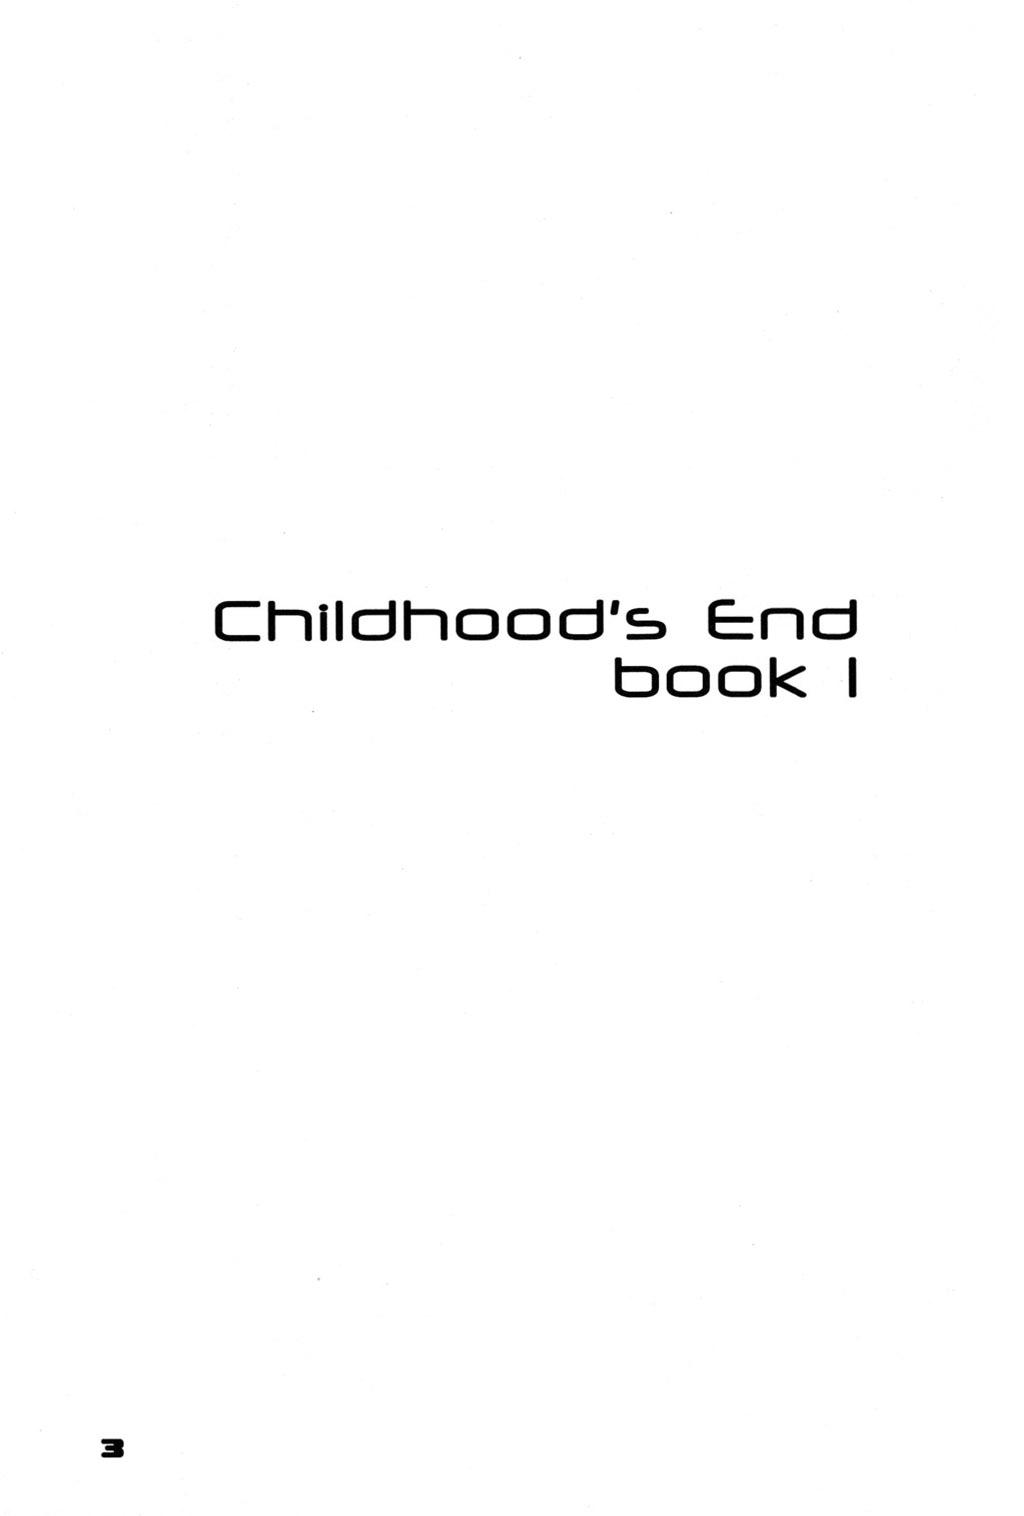 Short Childhood's End - Book 1 Real Couple - Page 3